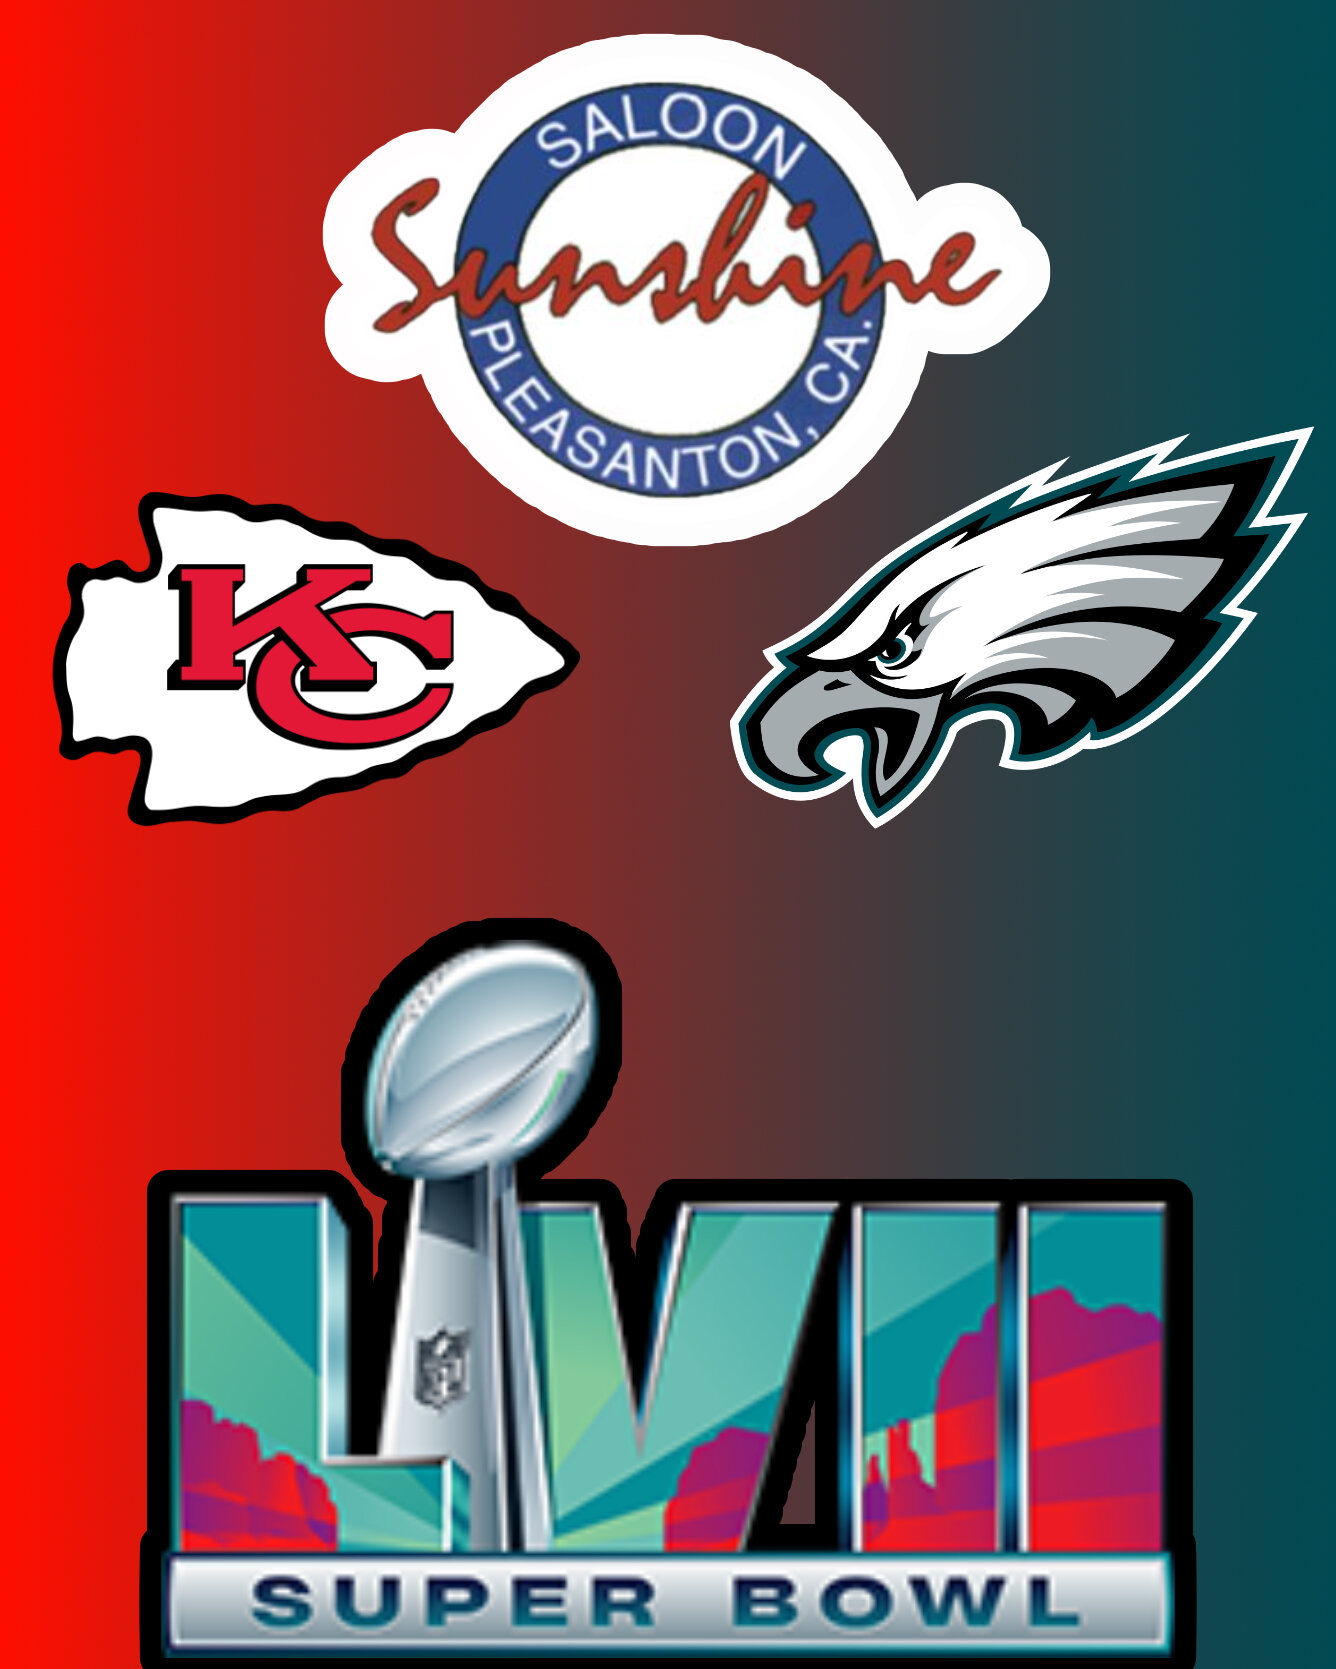 The Big Game is upon us! The best way to enjoy your Super Bowl is among the roaring crowd, with great food and drinks. Sunshine Saloon will be serving up Philly Omelettes, Crab Sliders, Baby Back Ribs, variety chicken wings, and clam chowder all day 